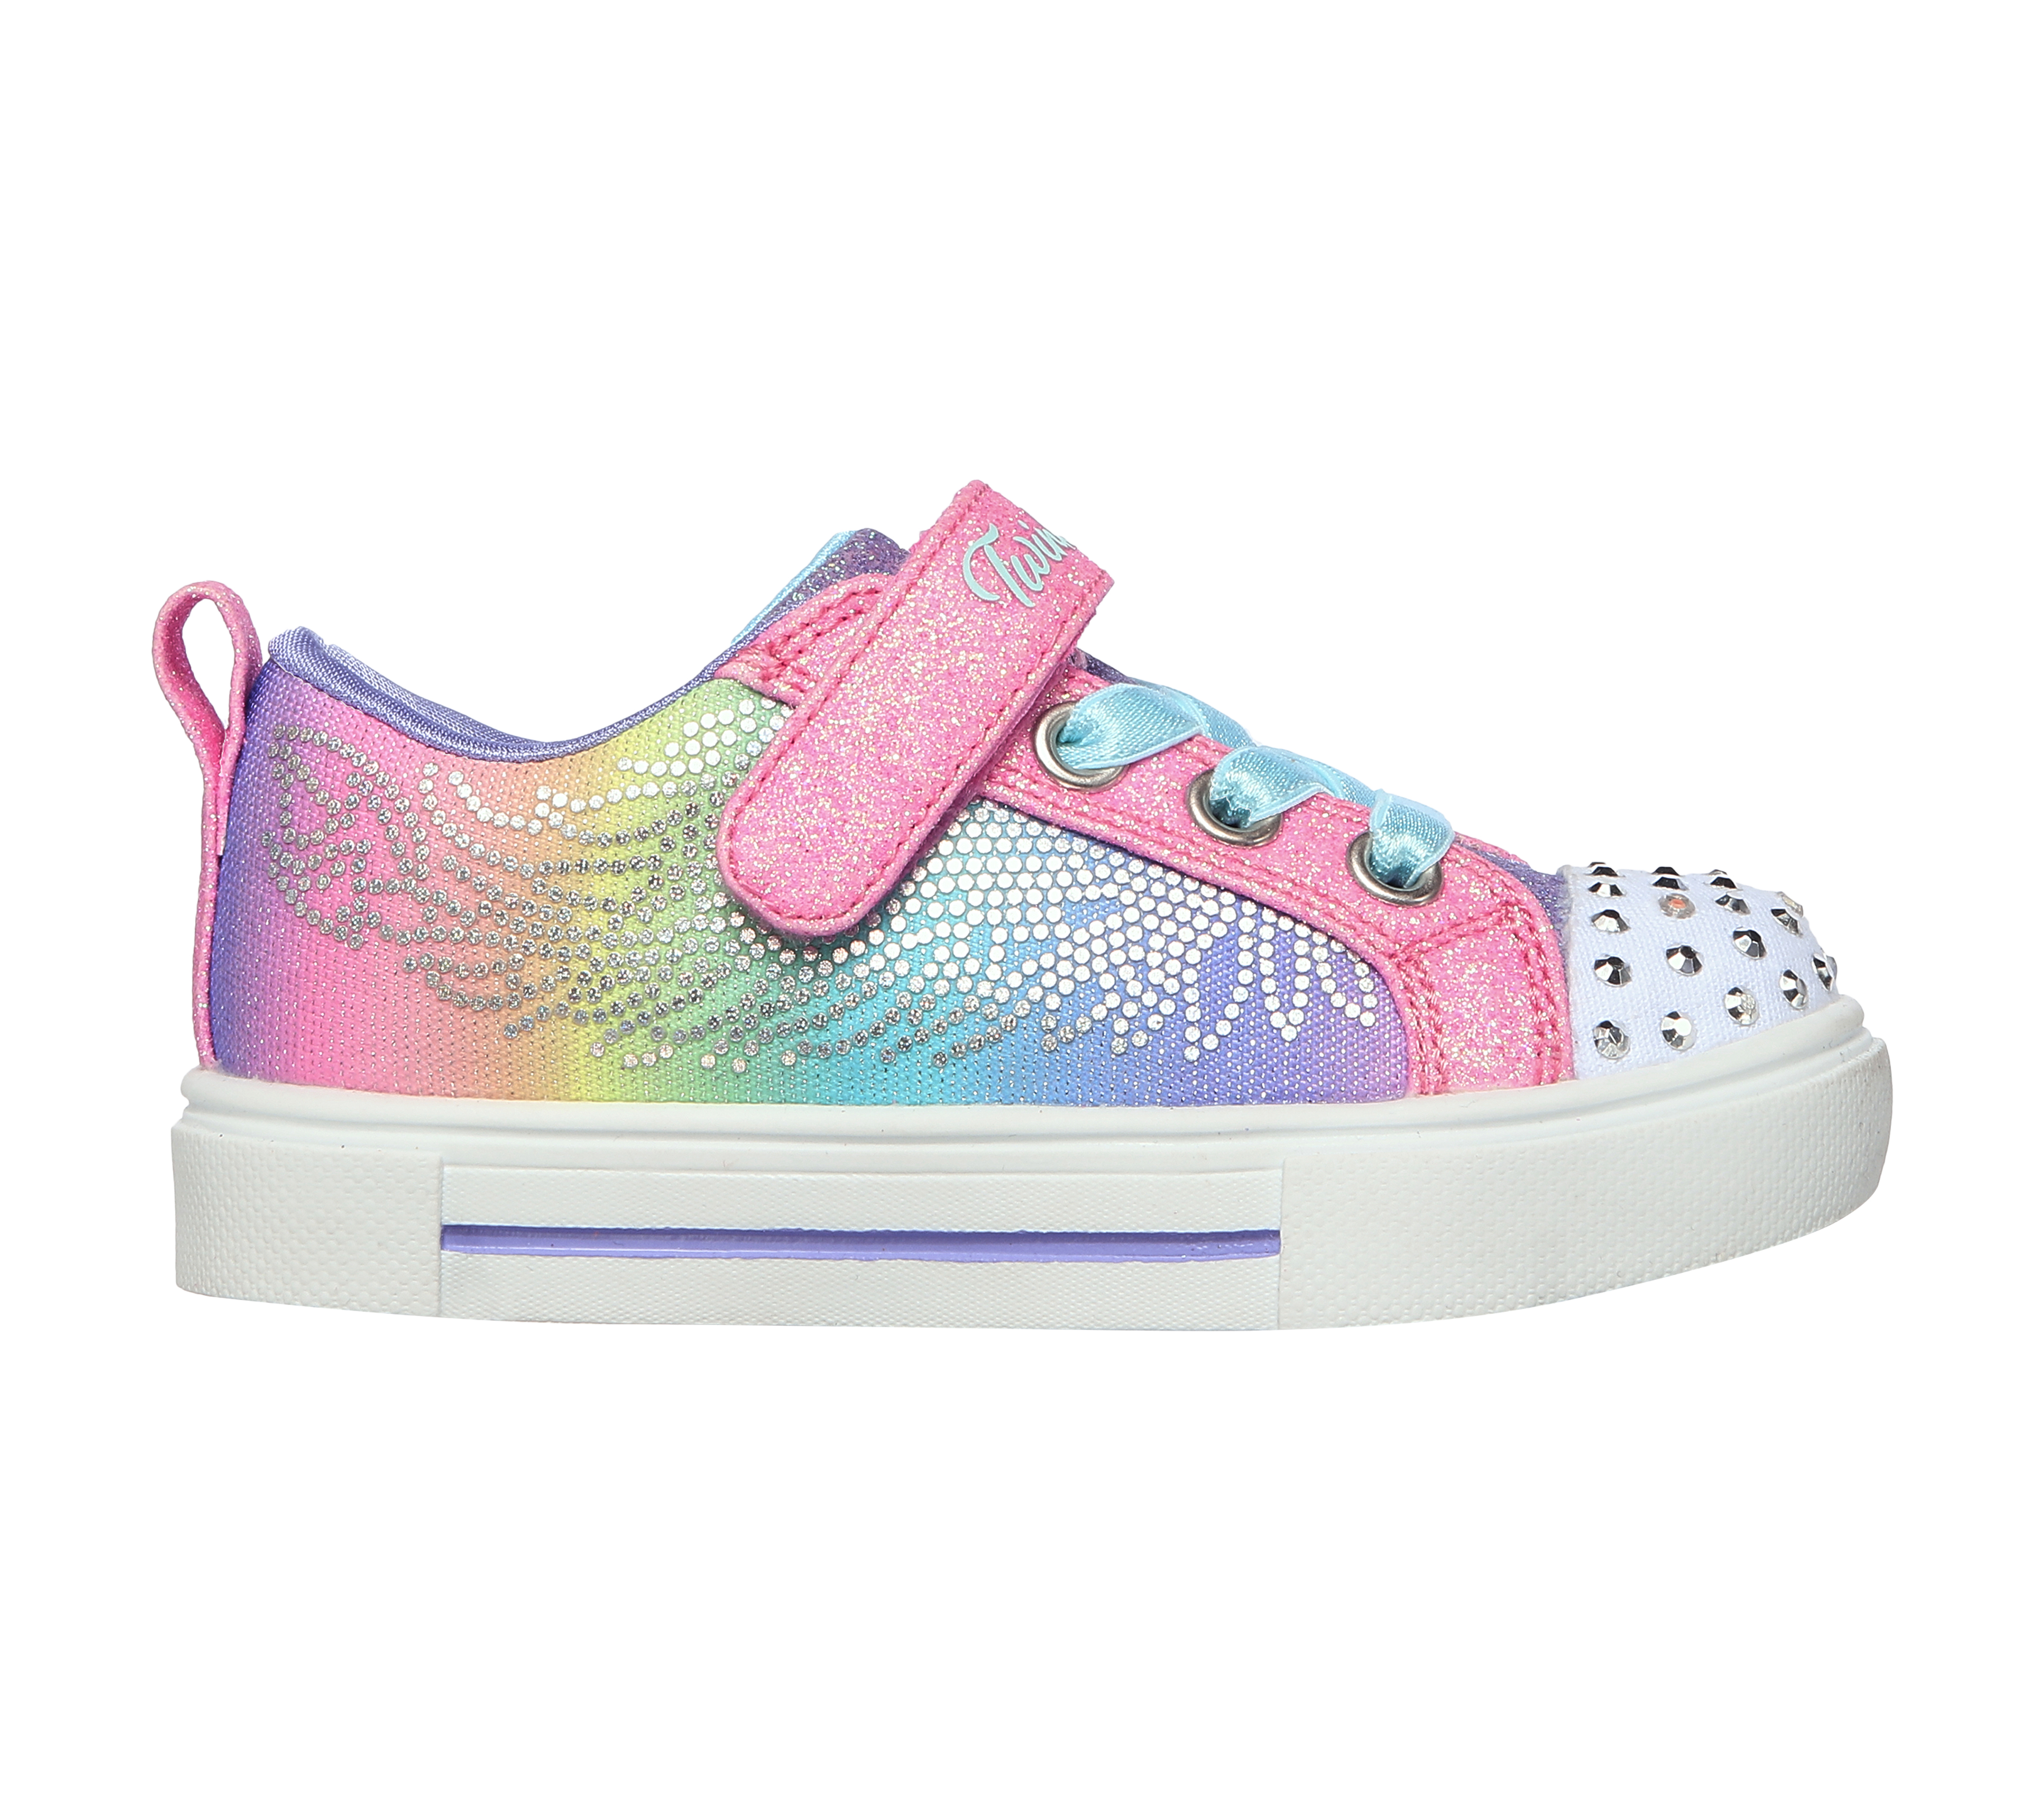 Shop the Girl's Twinkle Toes: Twinkle Sparks Winged Magic | SKECHERS